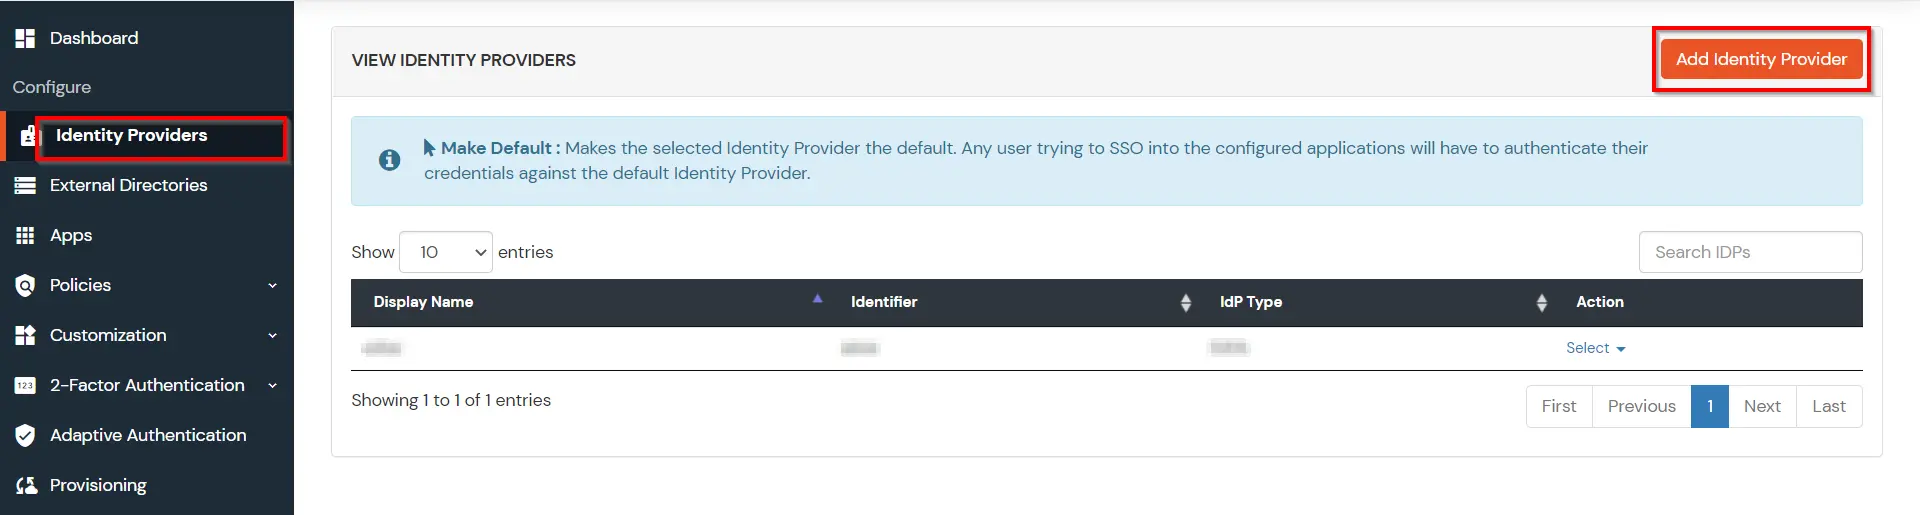 Add ADFS as Identity Provider for Oracle EBS ADFS SSO